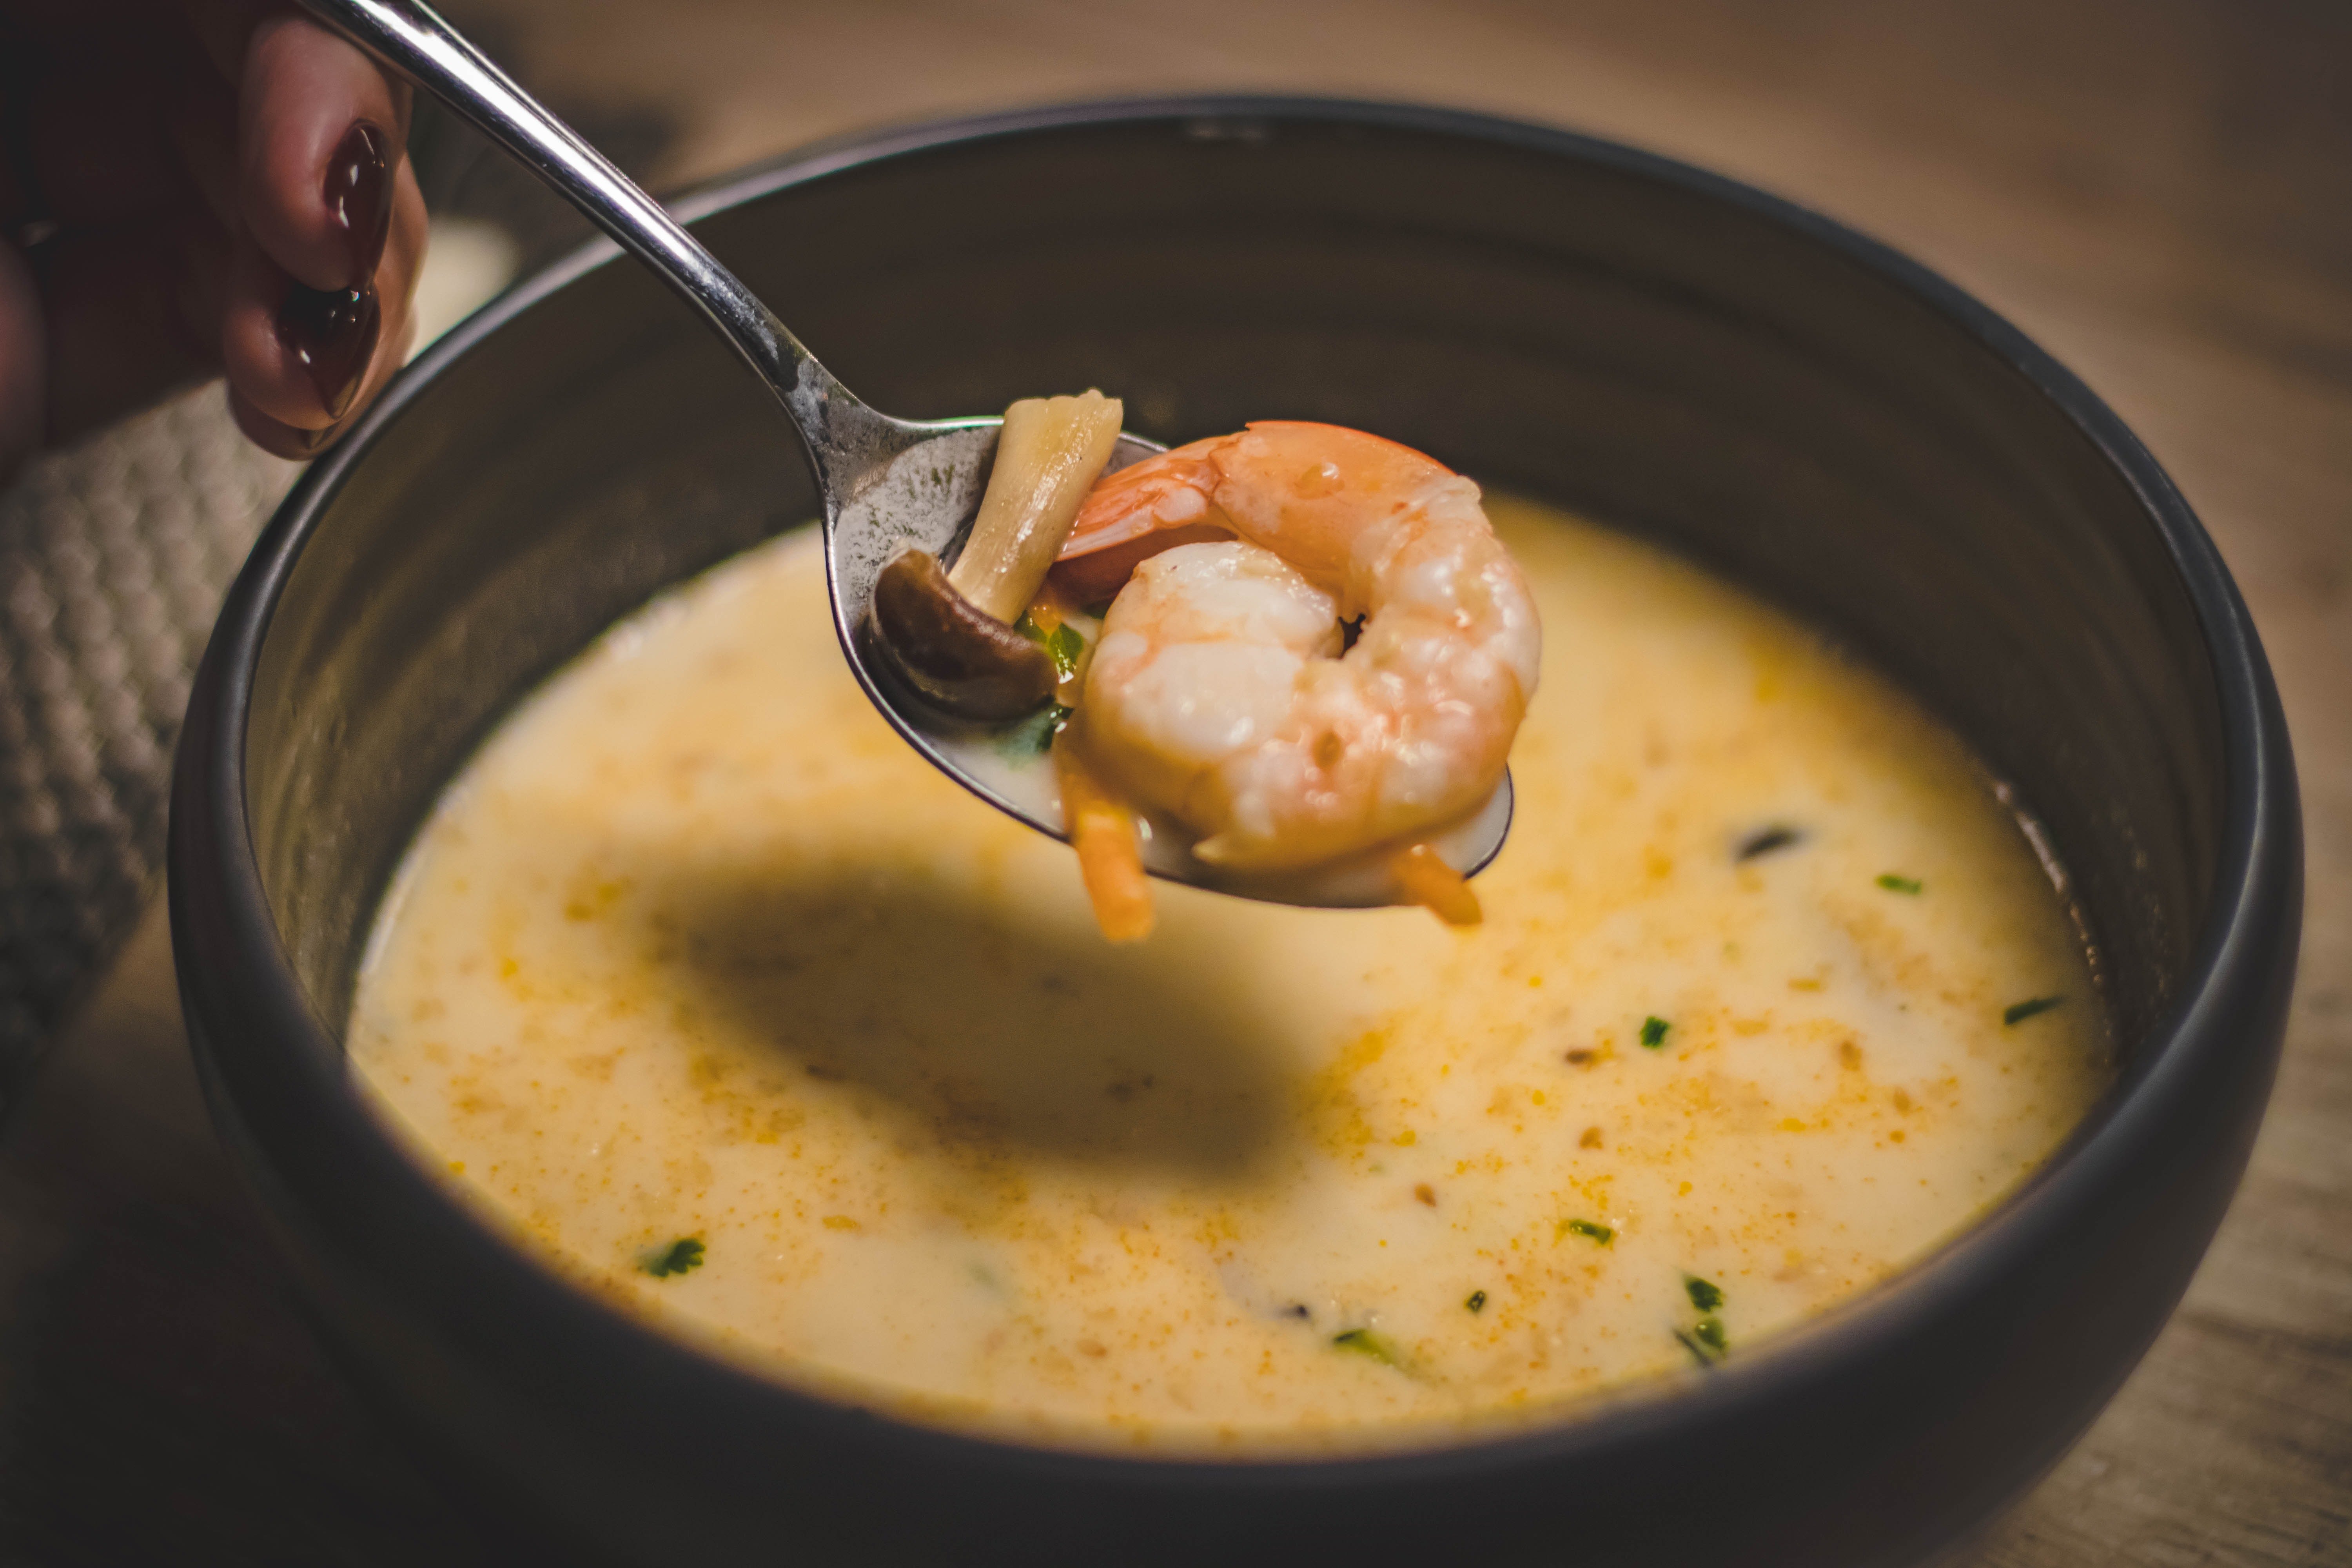 Mrs. Dalton cooked some soup one morning, which irritated Rosanna. | Source: Pexels